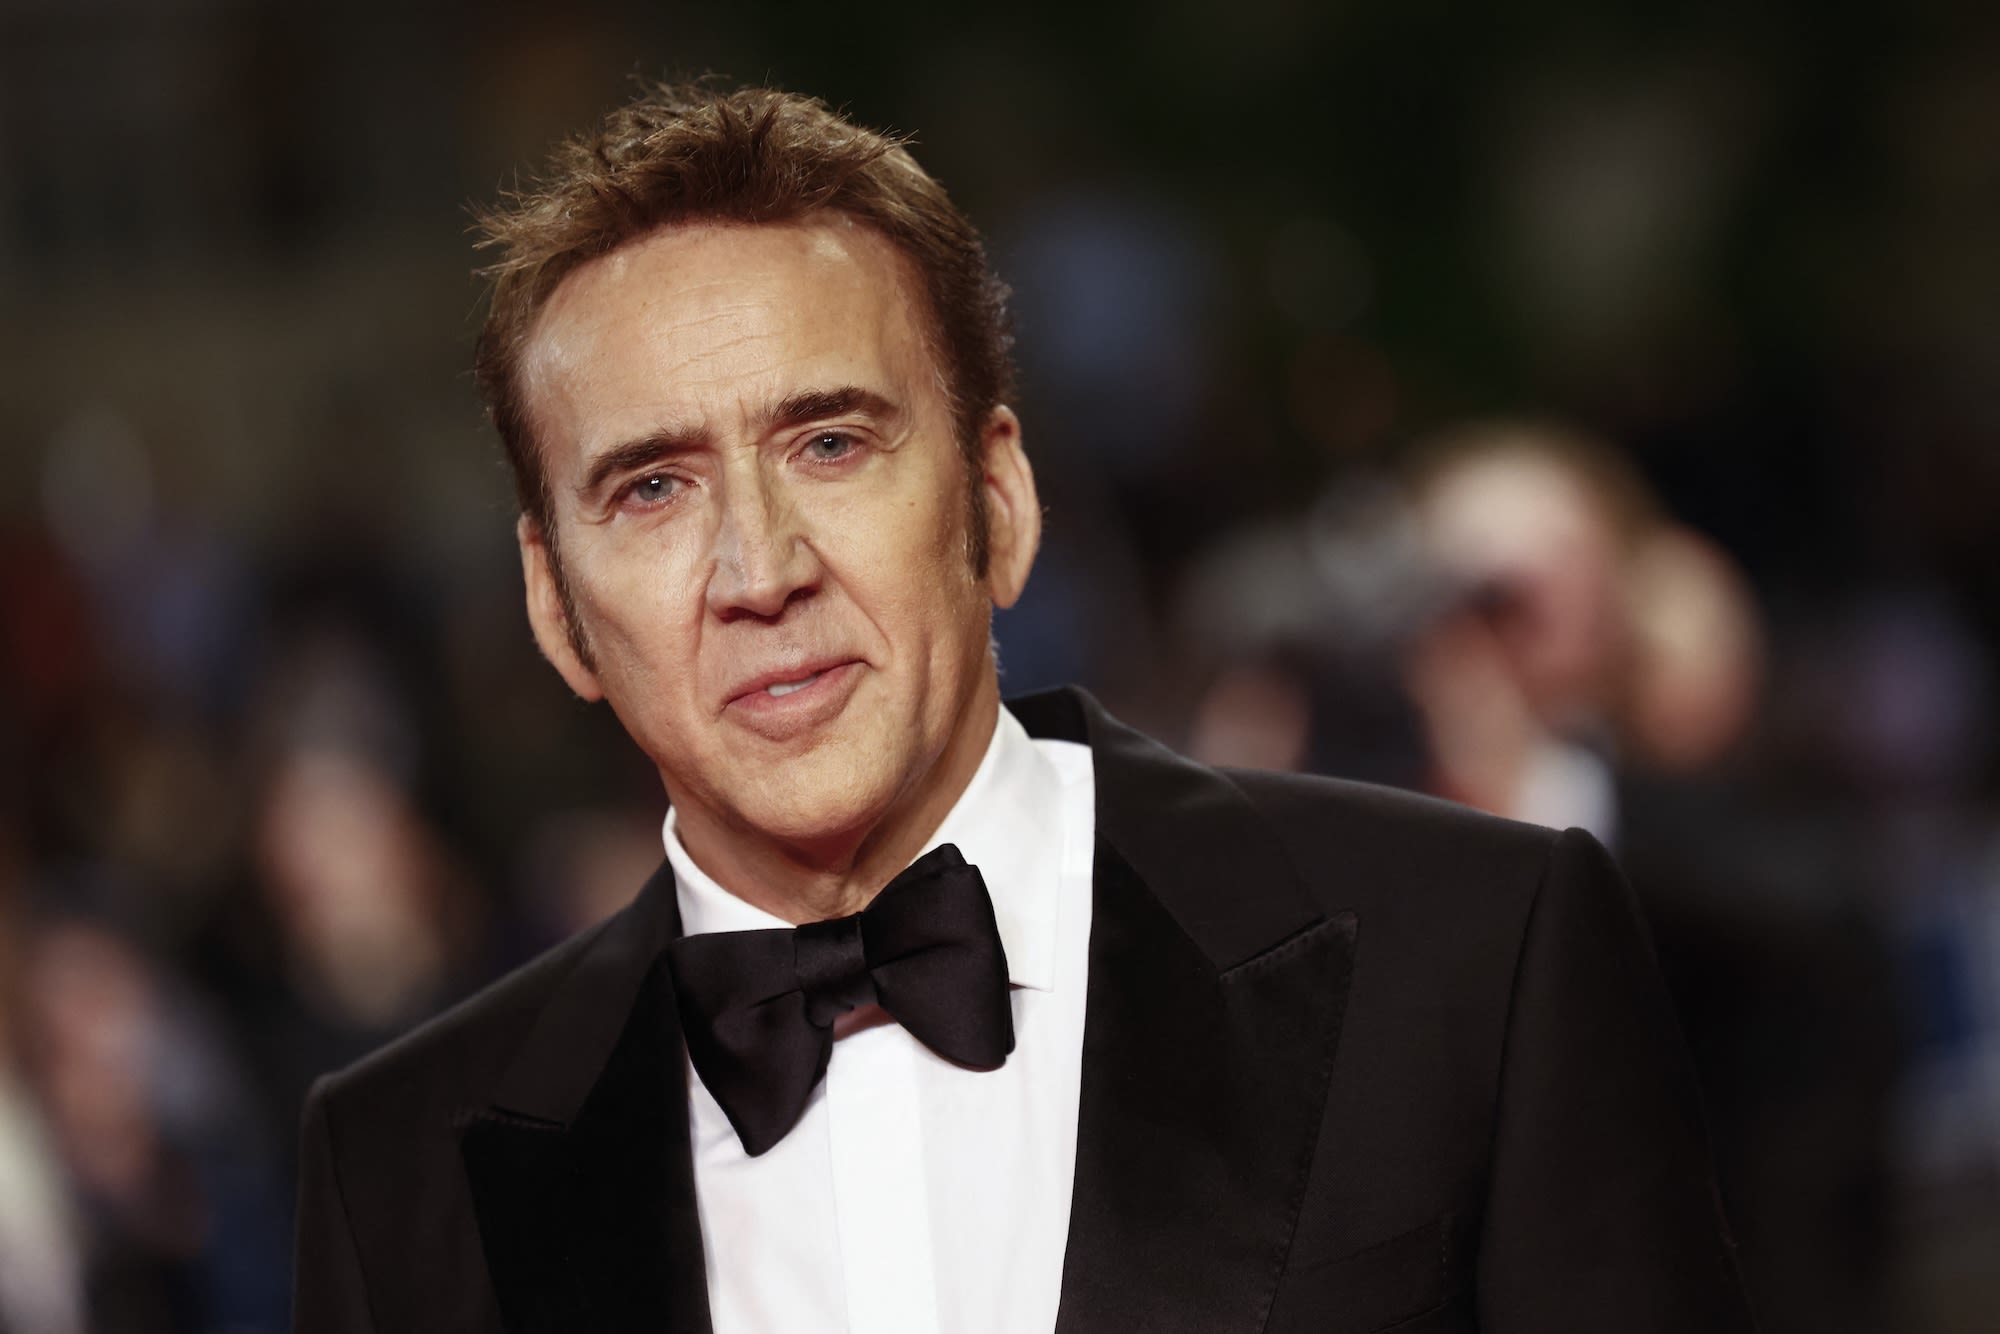 Nicolas Cage Says Having 3 Children With 3 Different Women Isn’t ‘What I Thought Would Happen’